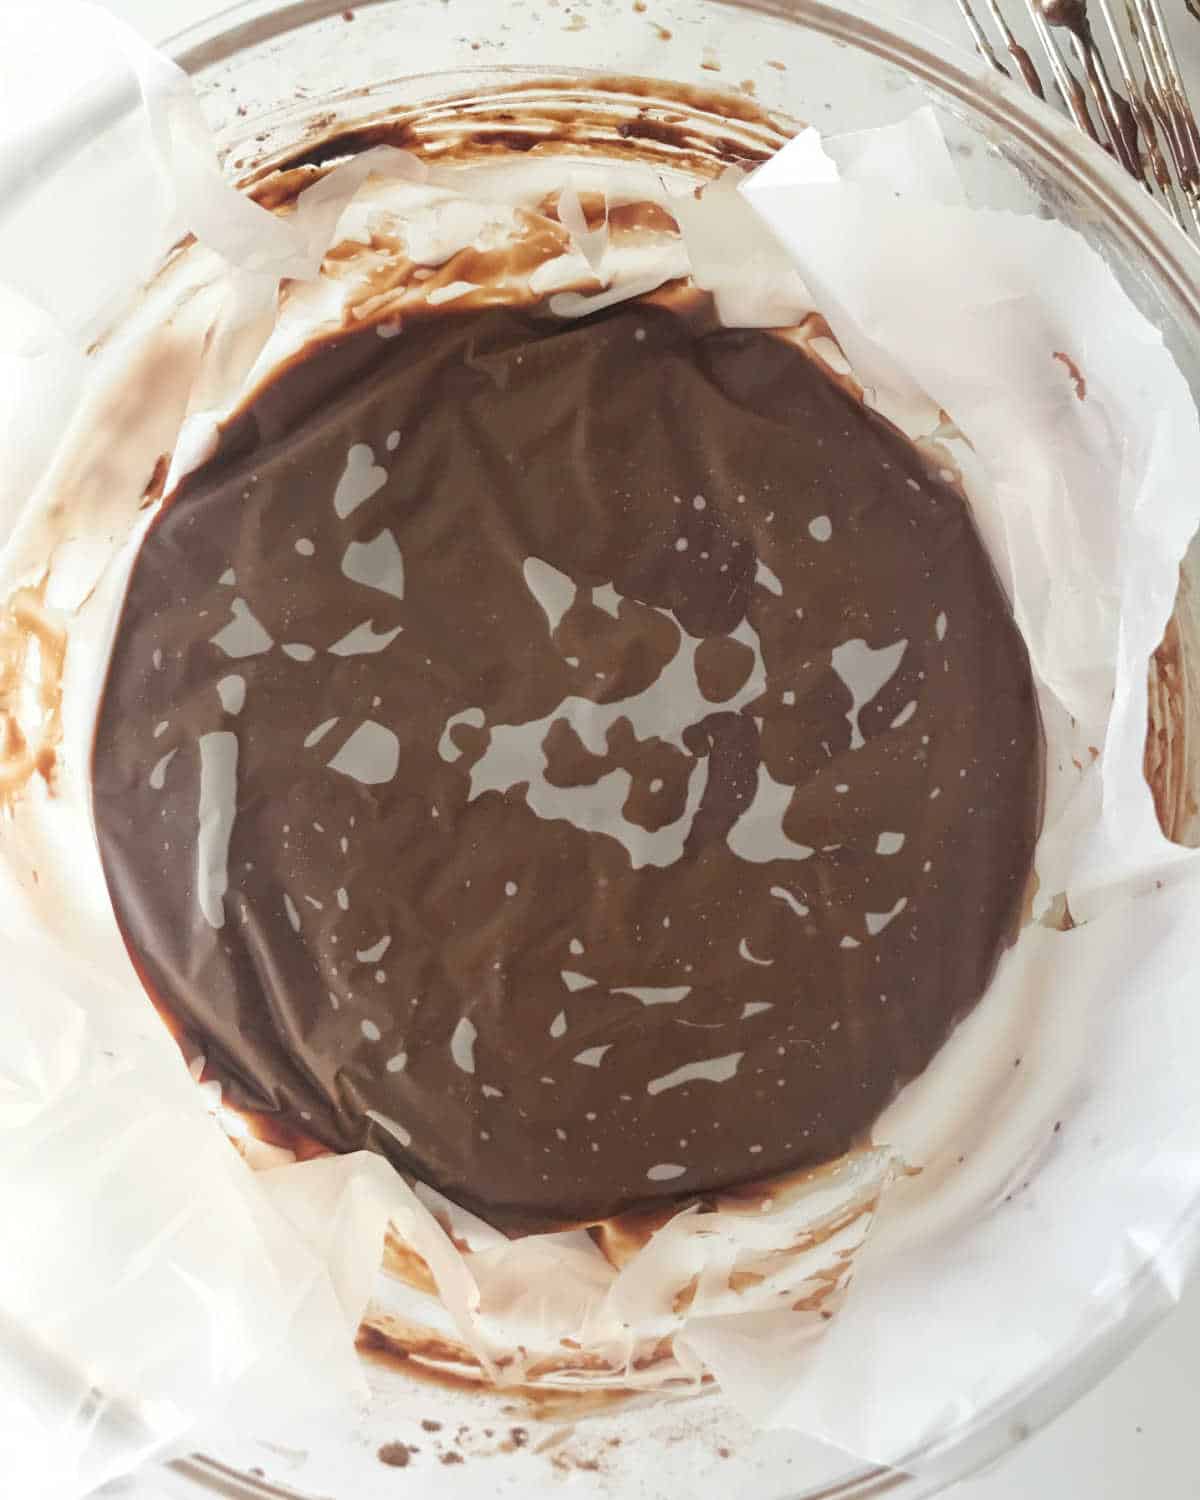 Plastic sheet covering chocolate pudding mixture in a glass bowl.